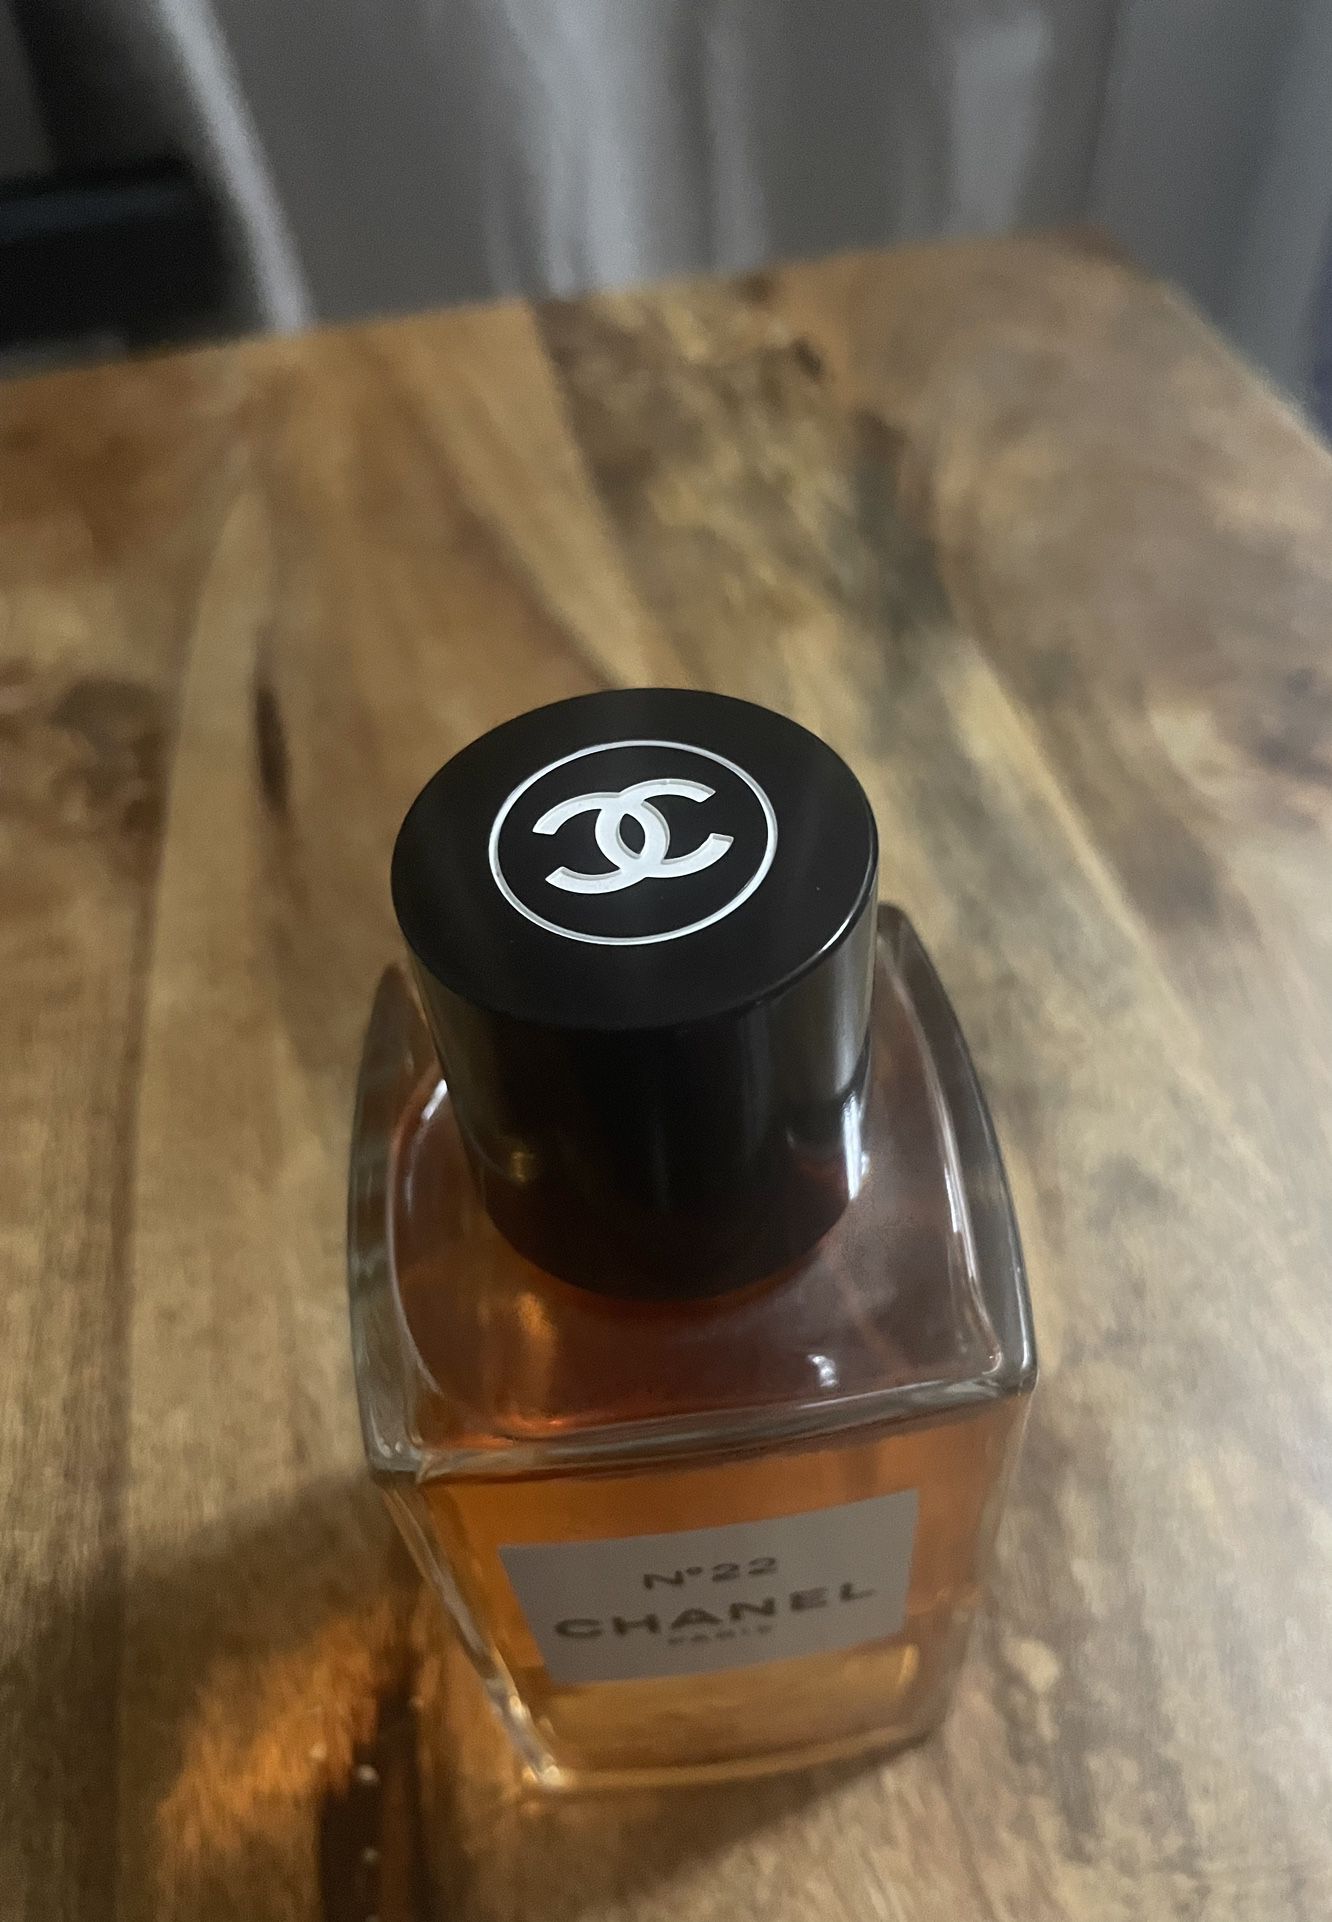 Chanel Perfume for Sale in Houston, TX - OfferUp